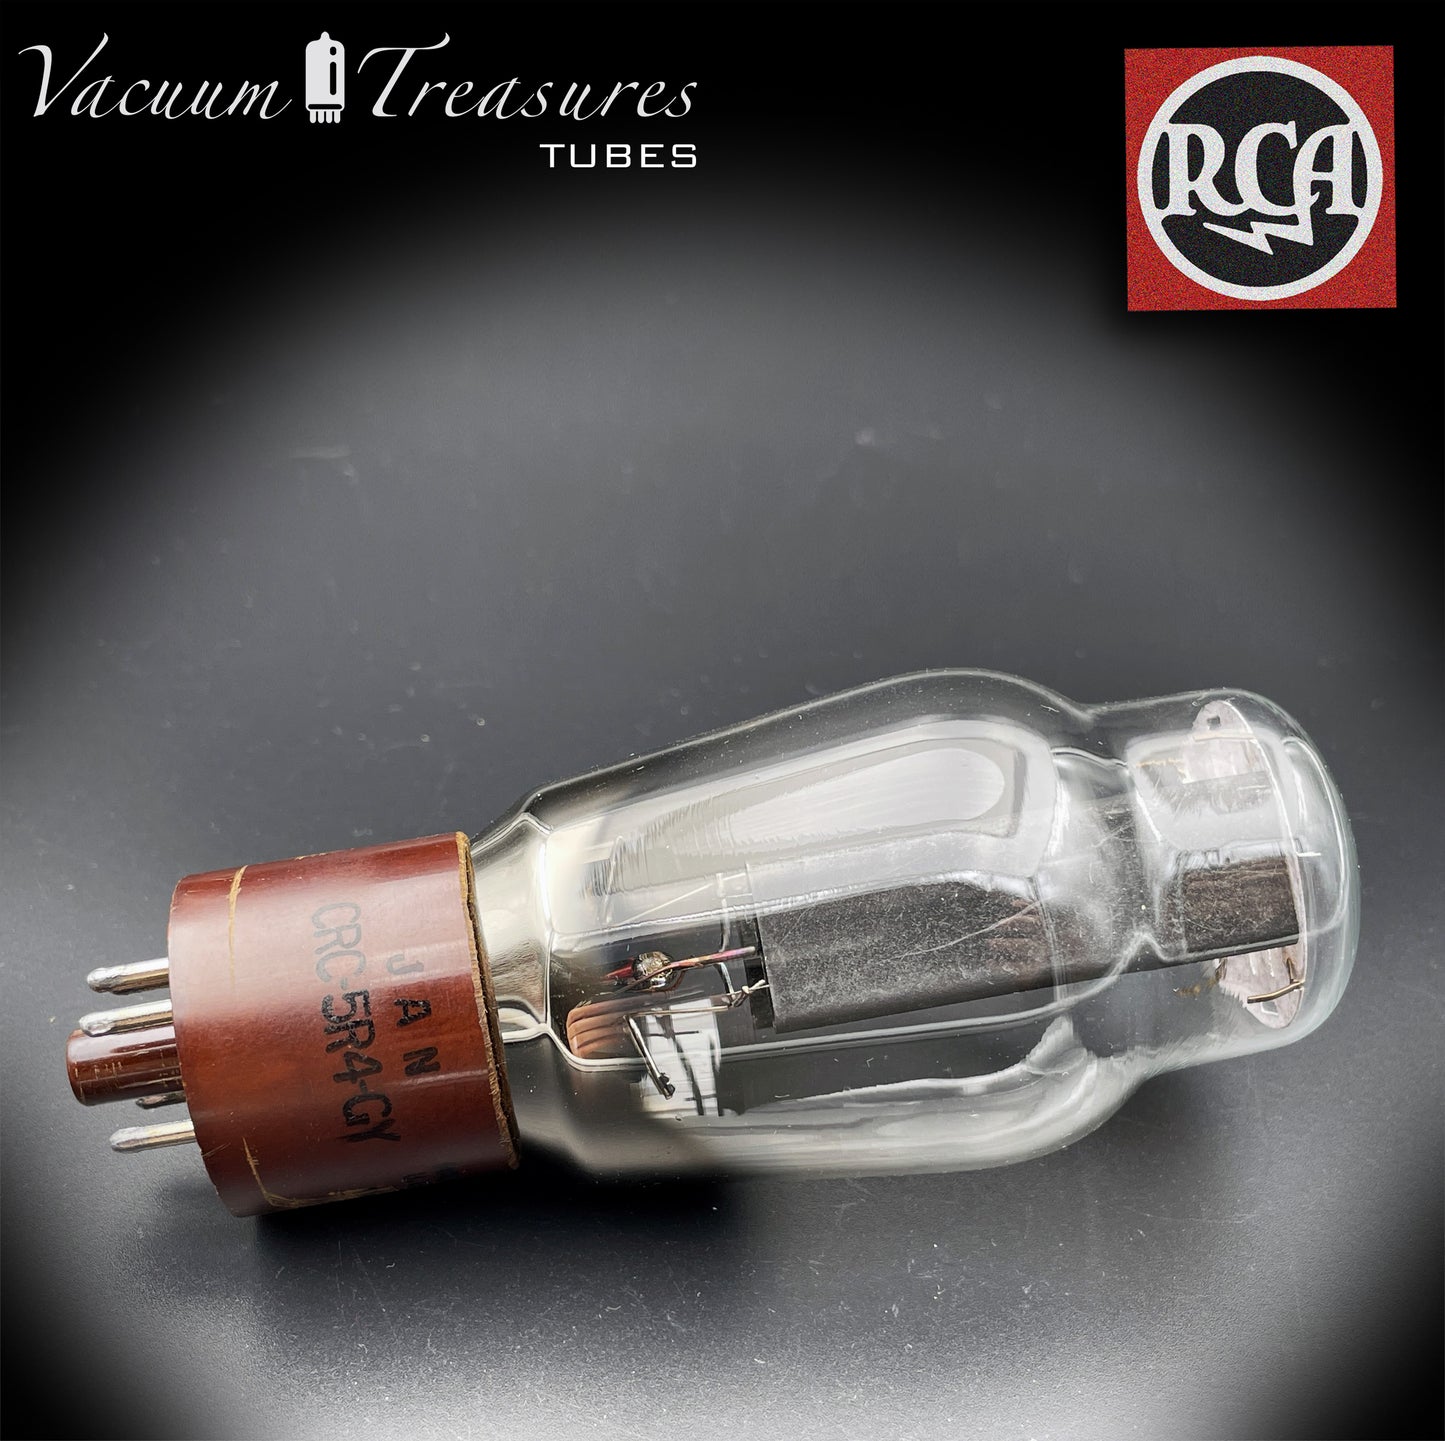 5R4GY JAN ( CV717 ) RCA Black Plates Dual Bottom Square Getter Matched Tubes Rectifiers Made in USA '45